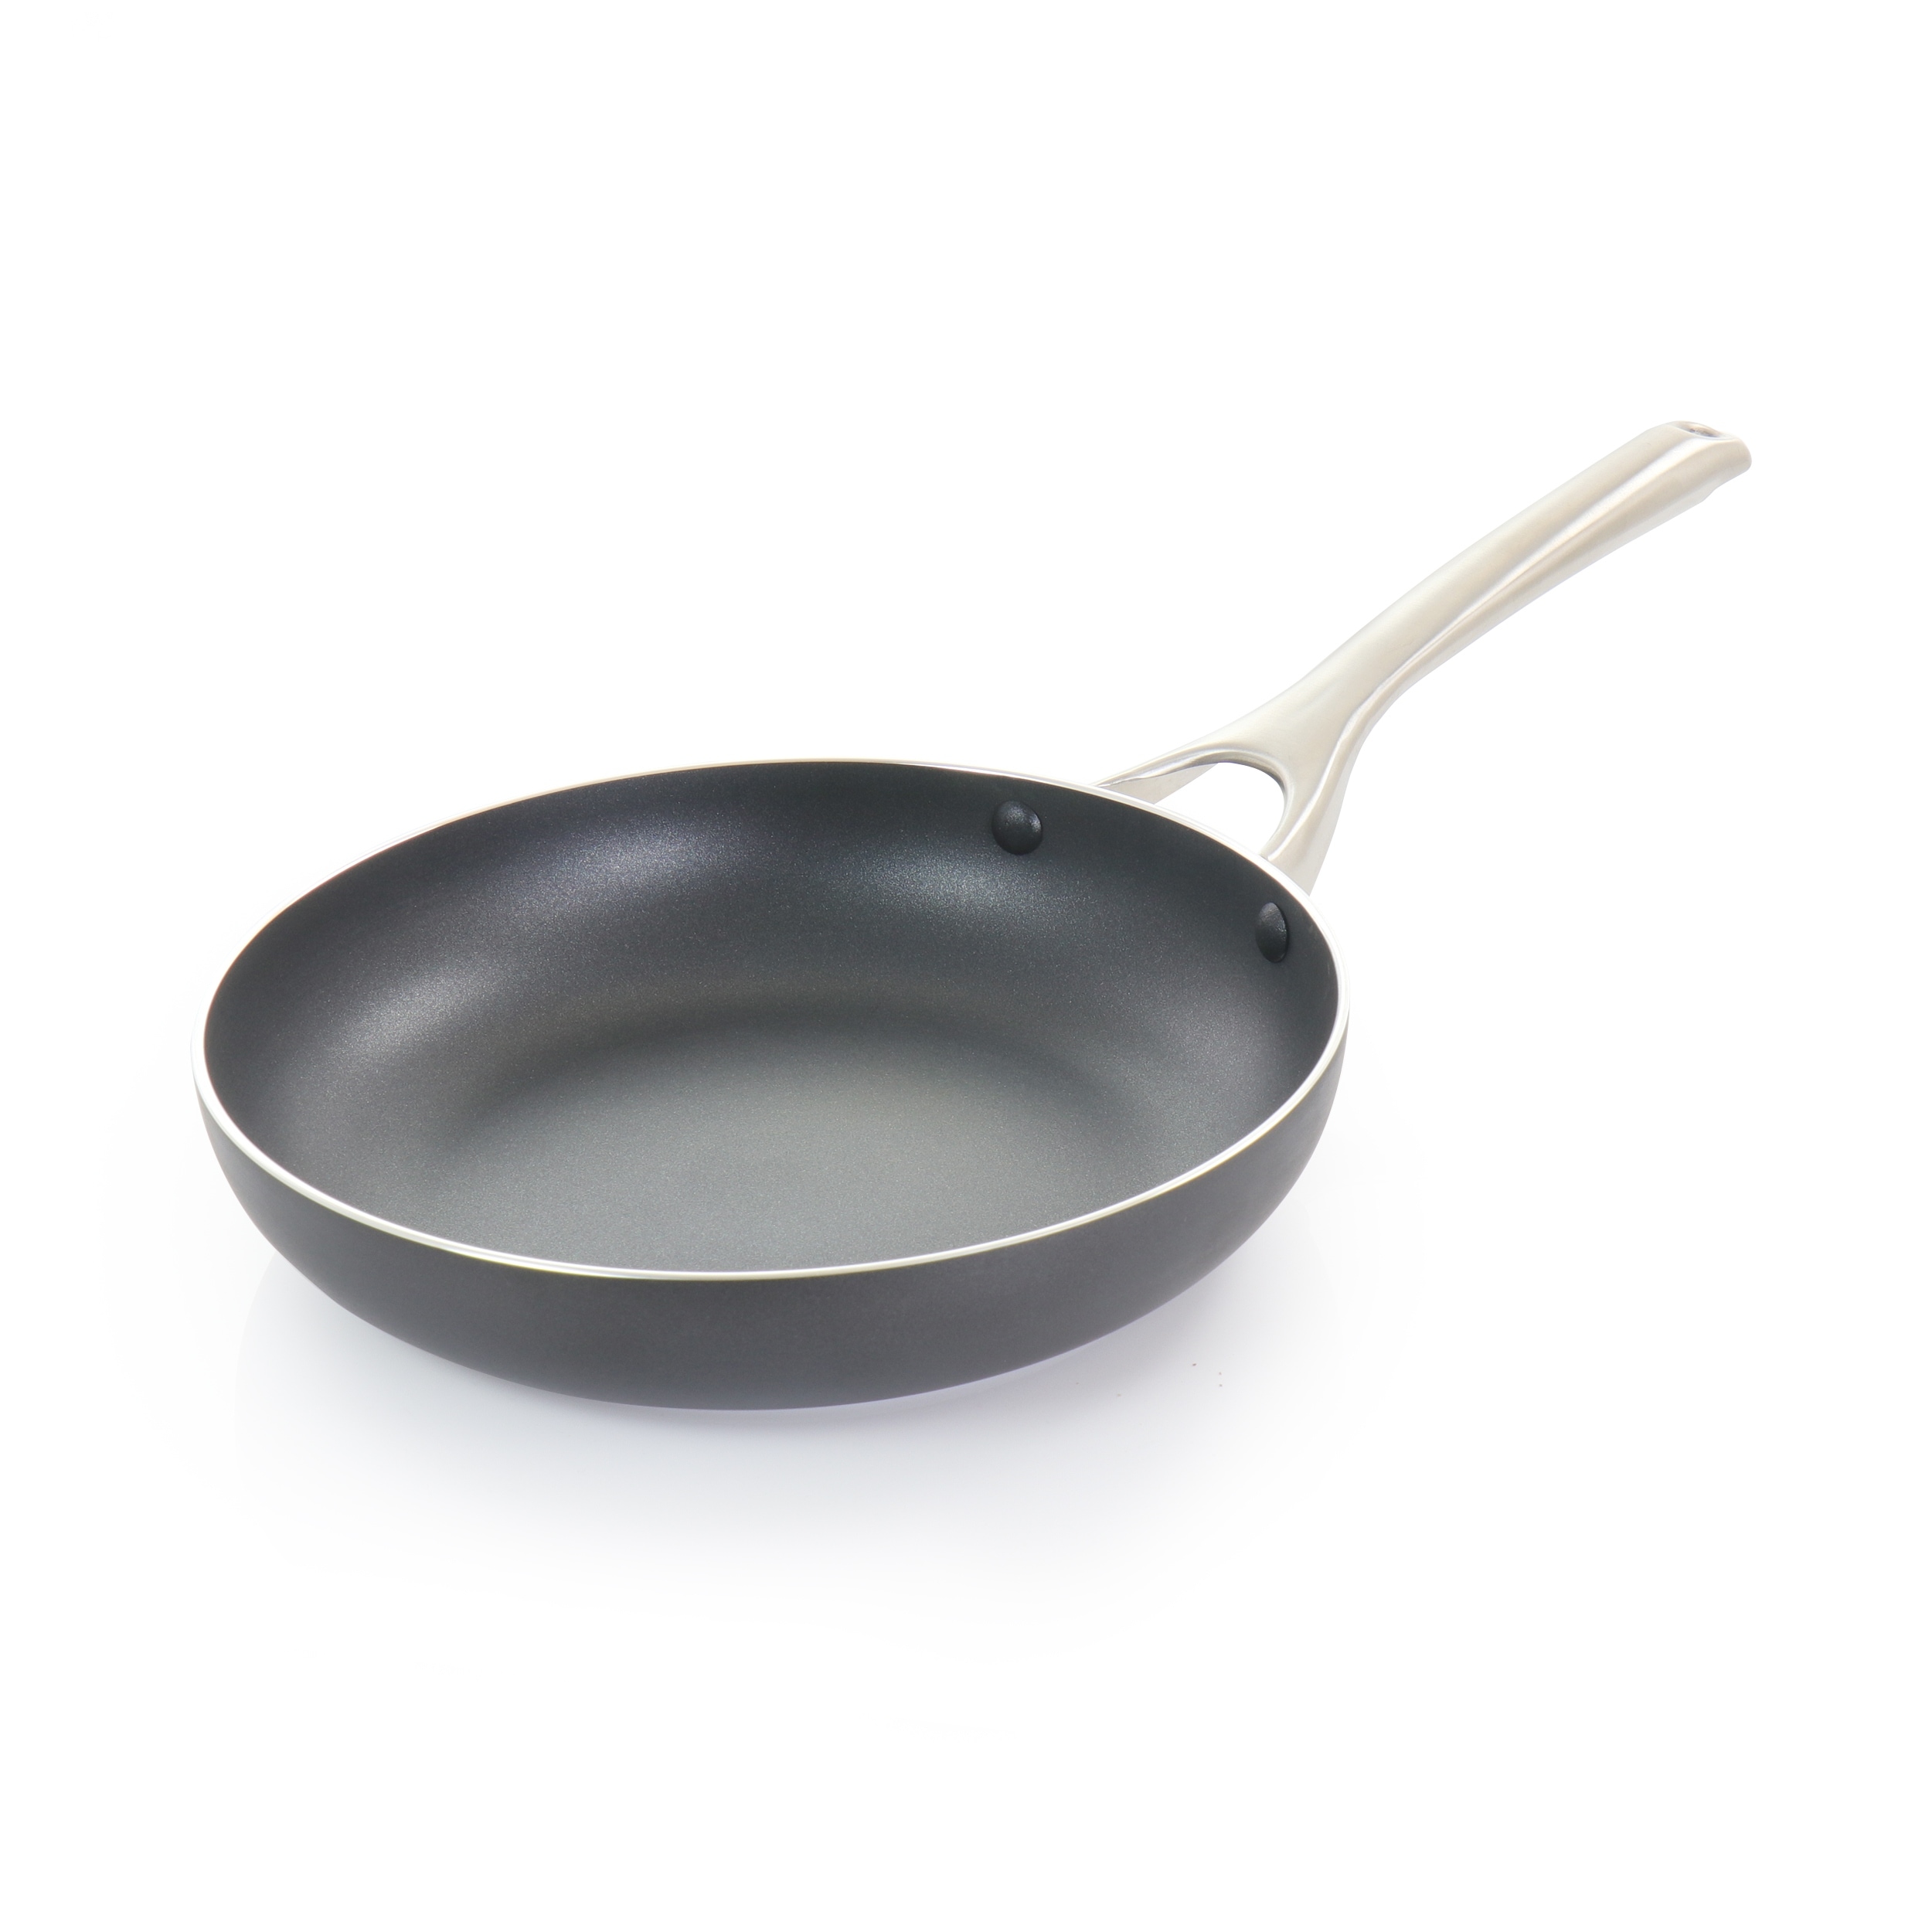 https://ak1.ostkcdn.com/images/products/is/images/direct/b7fe2351ef2ae6034eb0bed0a529d95ab014c3c7/Oster-Palladium-9.5-Inch-Aluminum-Frying-Pan.jpg